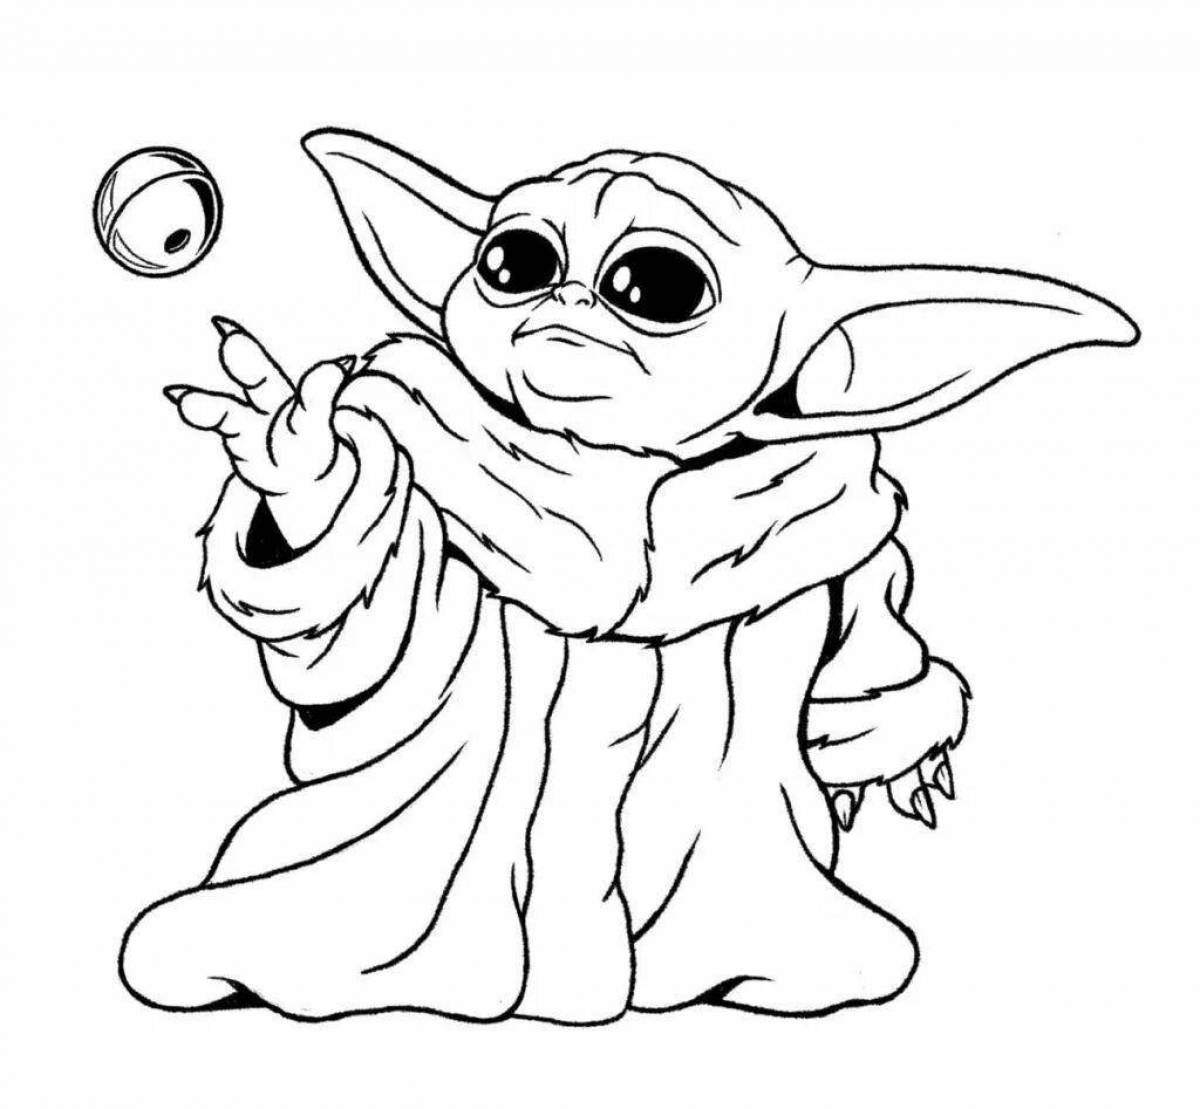 Amazing star wars food coloring page